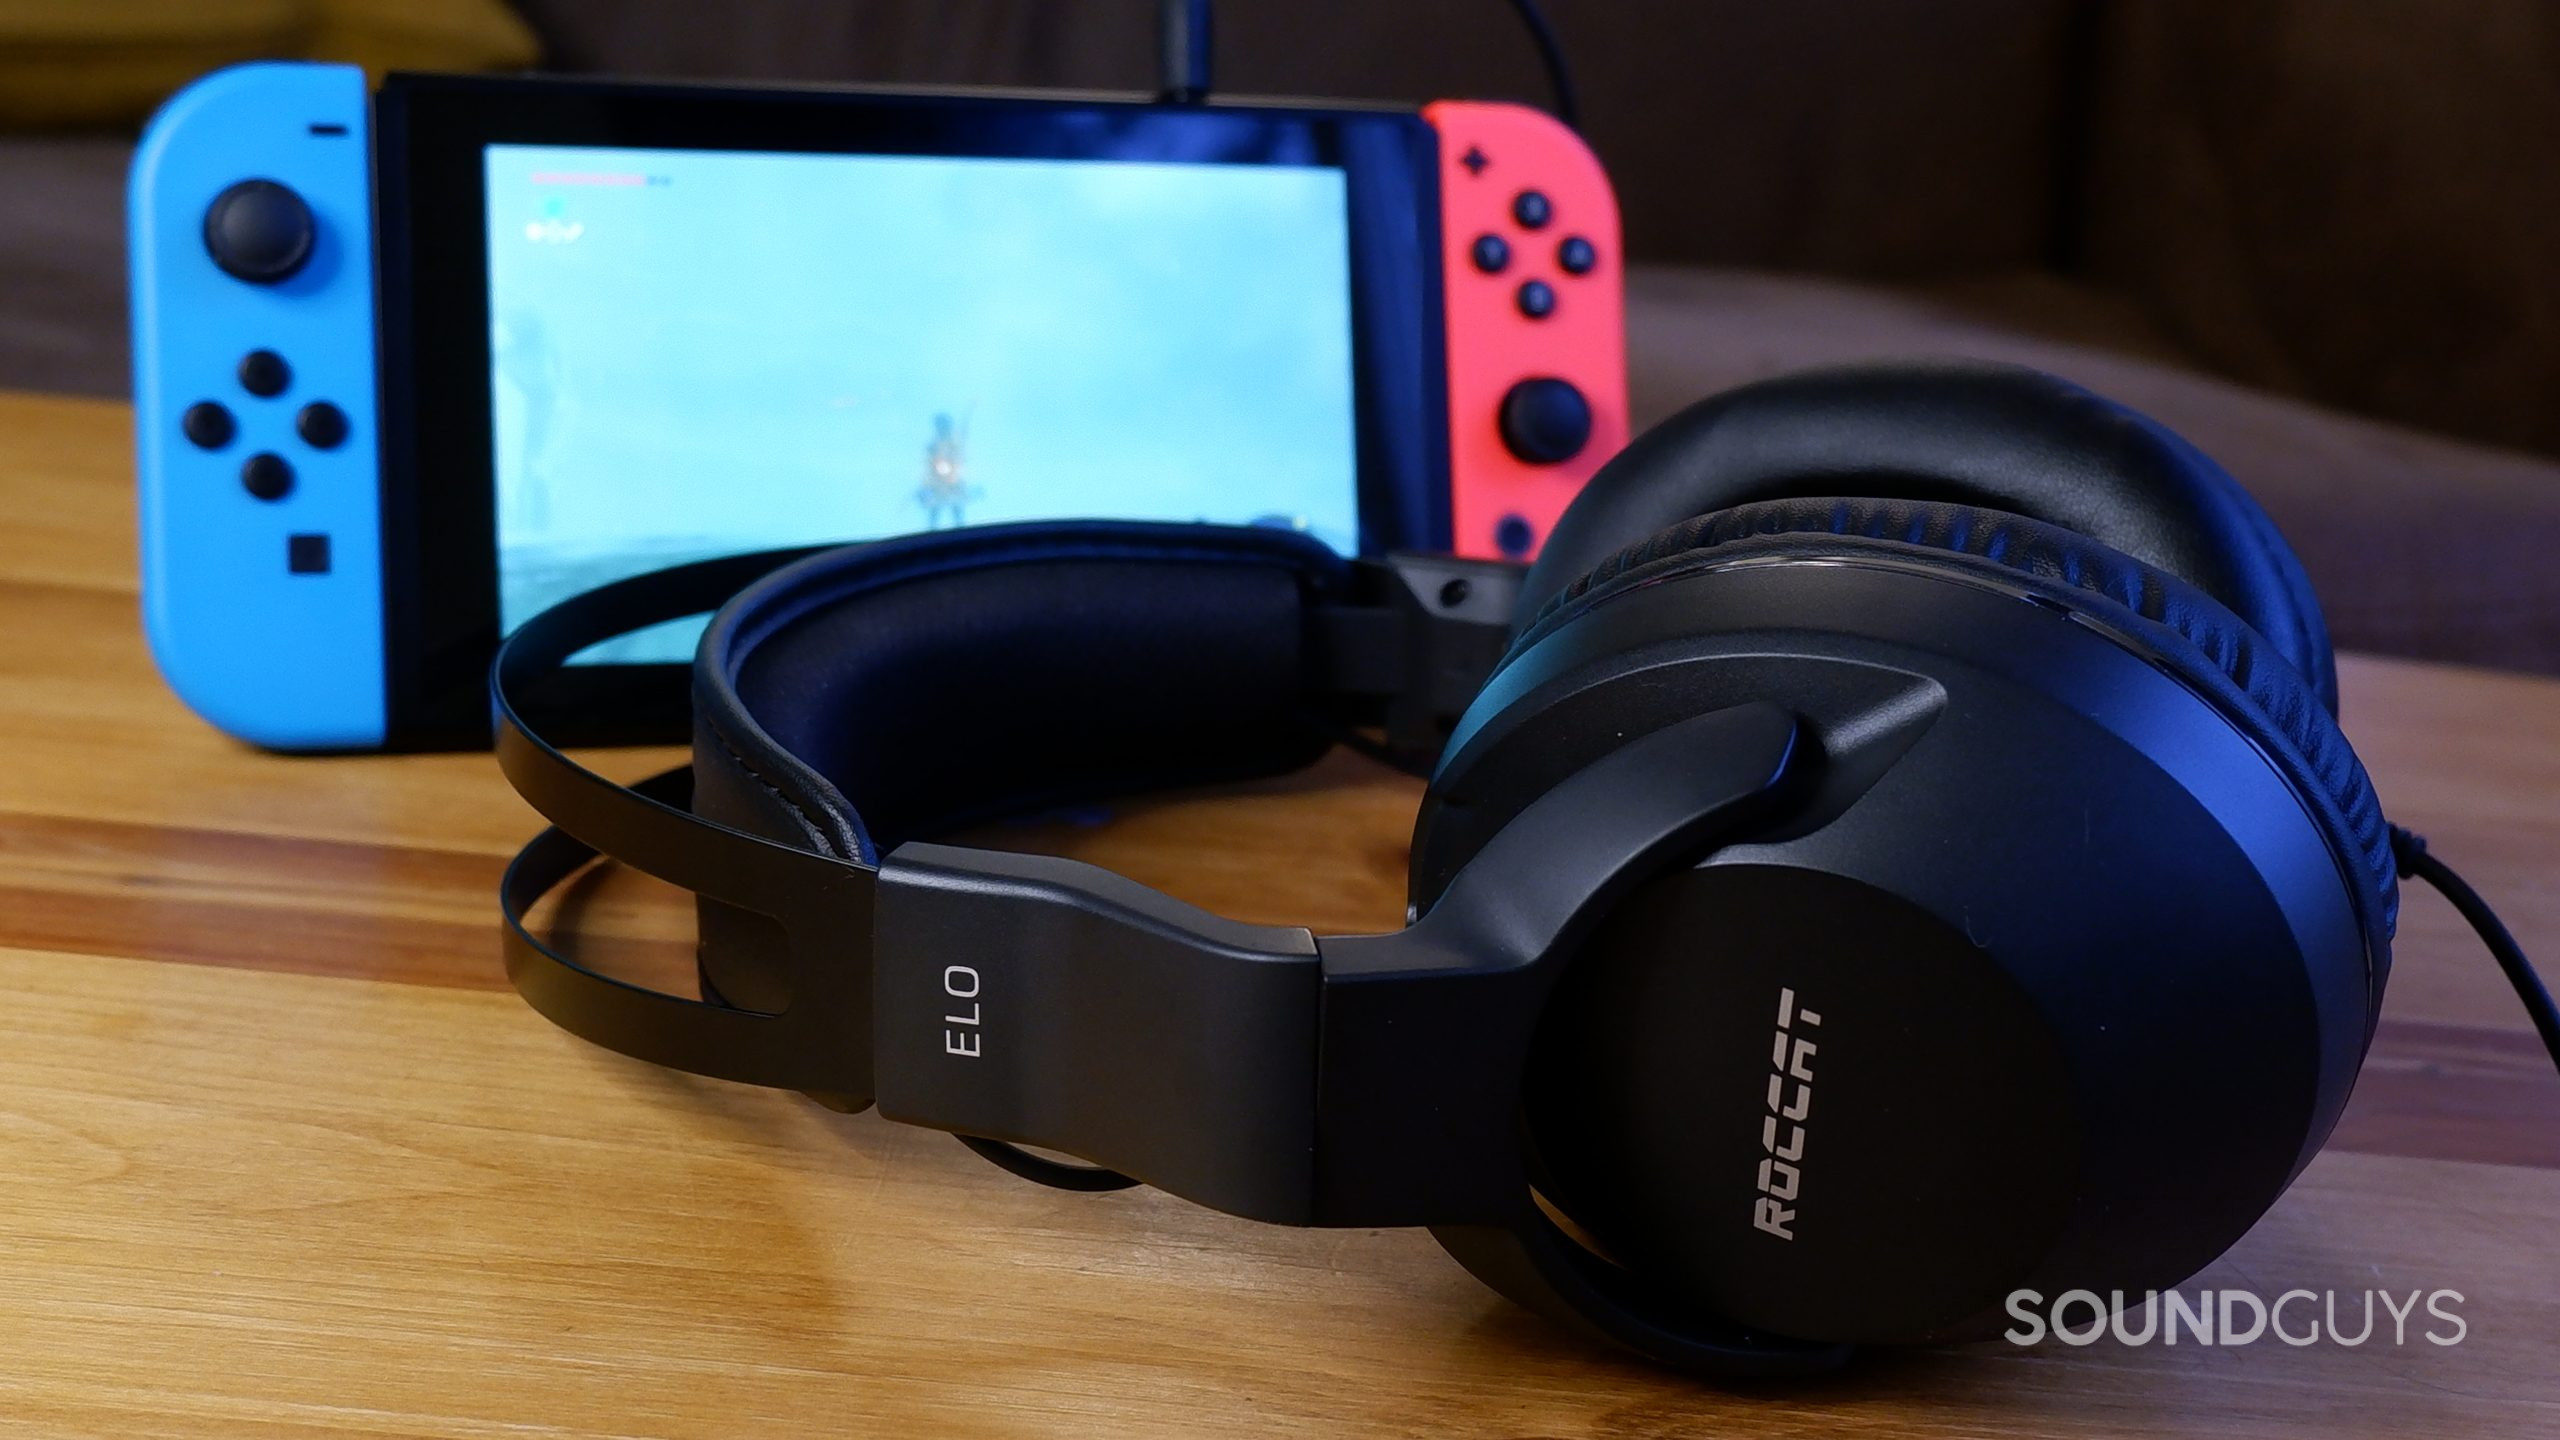 The ROCCAT Elo X Stereo headset beside a Nintendo Switch.